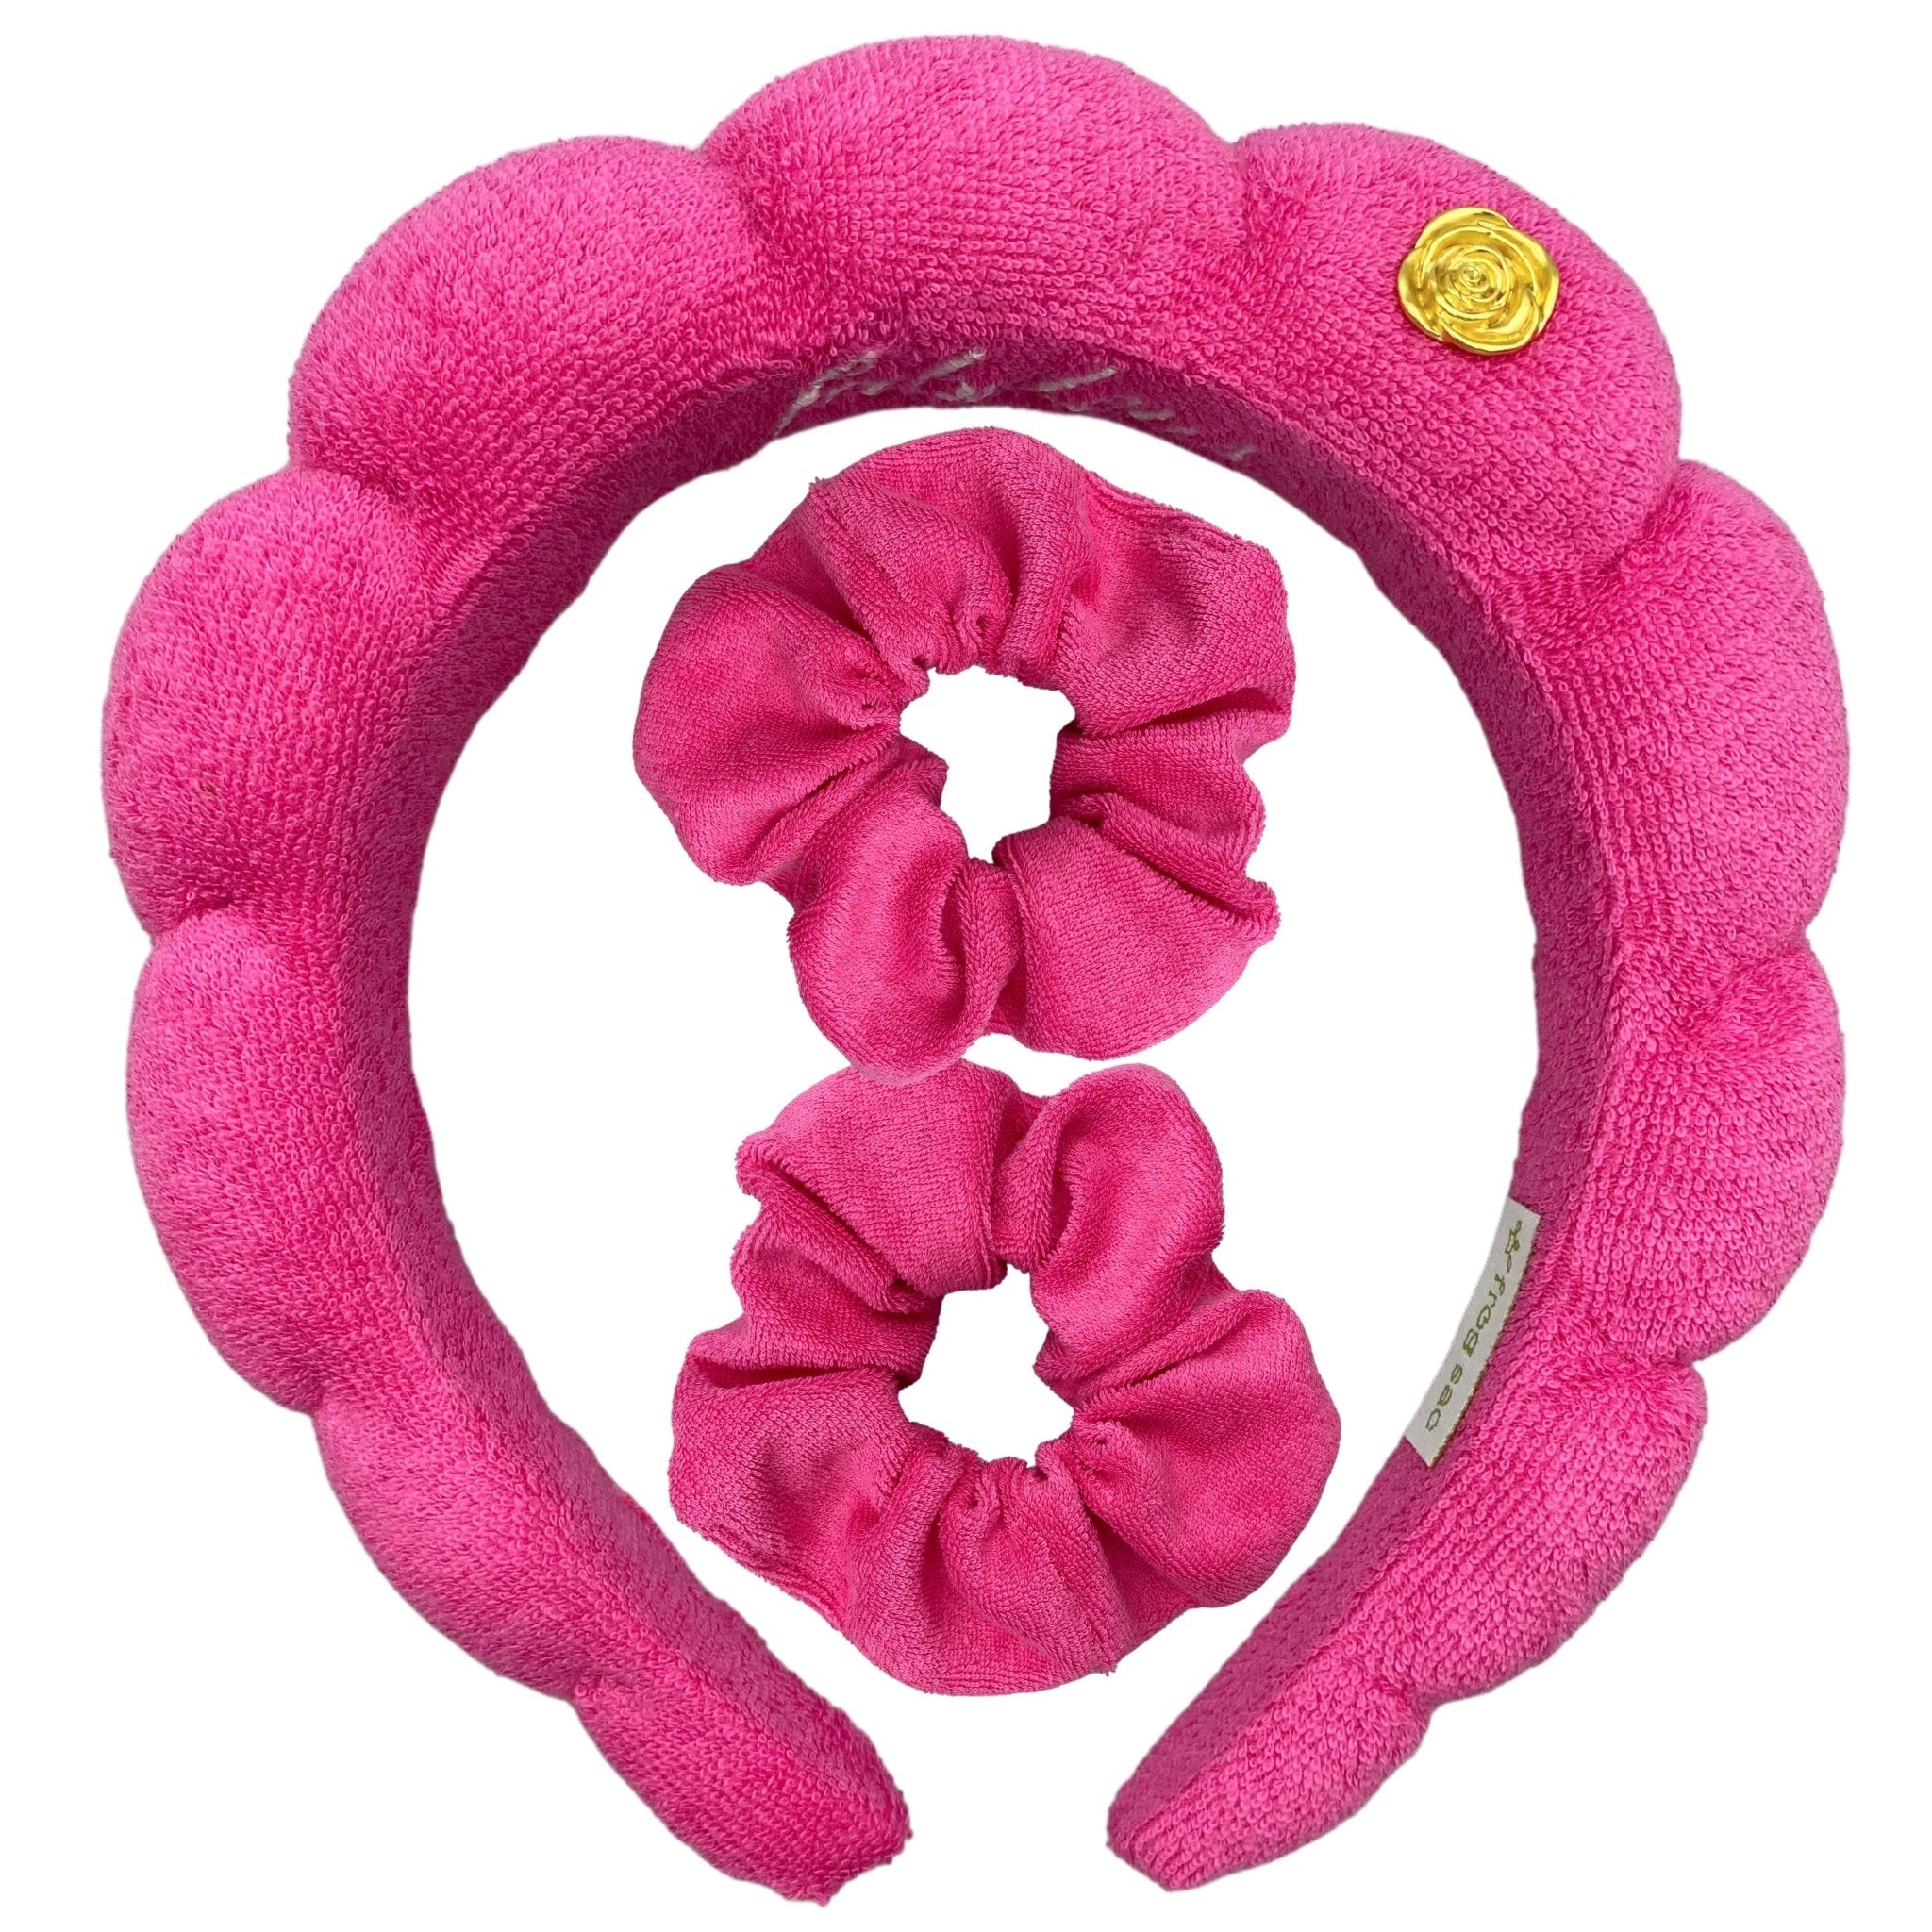 Puffy Spiral Terry Cloth Padded Spa Headband and Scrunchie Wristbands - FROG SAC